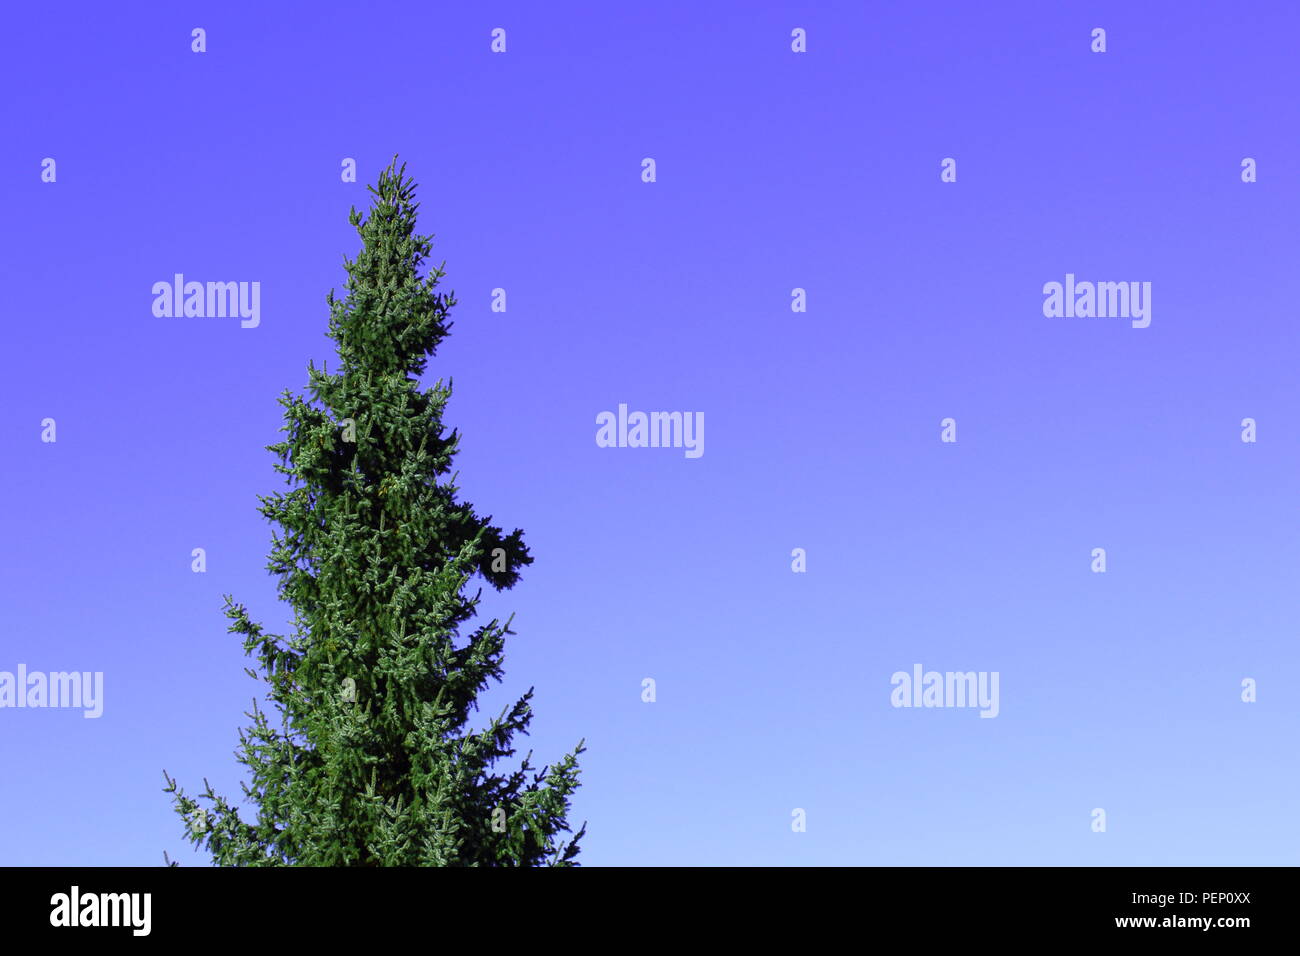 blue spruce (Picea pungens) against the blue sky with copy space, can be used as a background Stock Photo